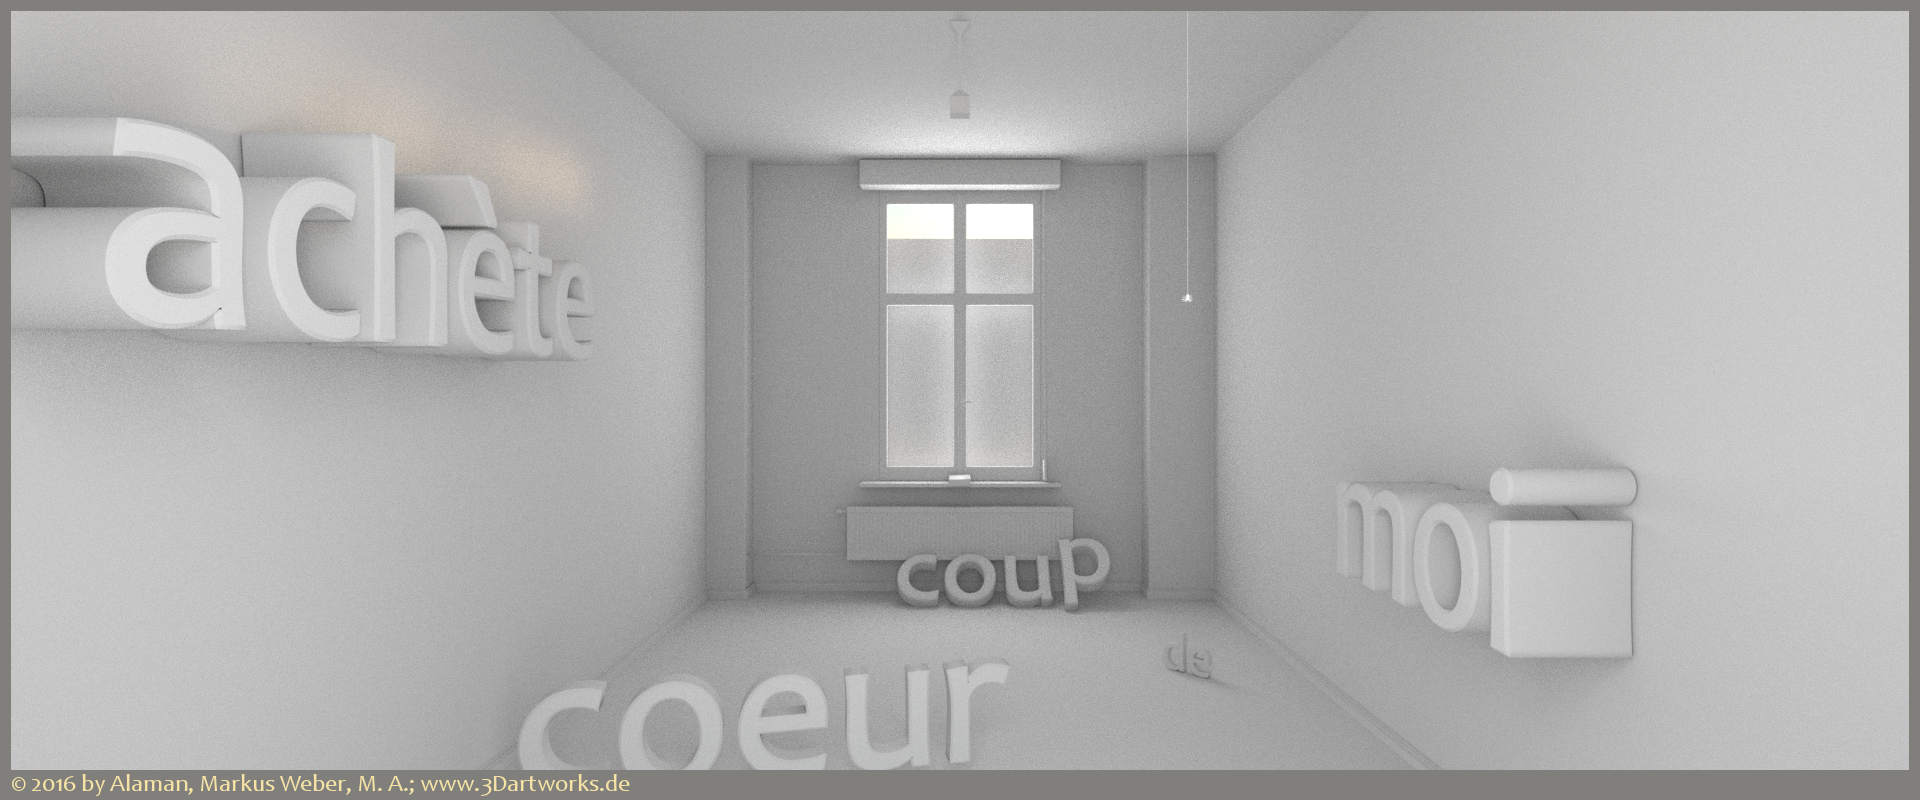 Work in progress at Alaman 3D Artworks: architectural visualization, buy me in French, blocking in.